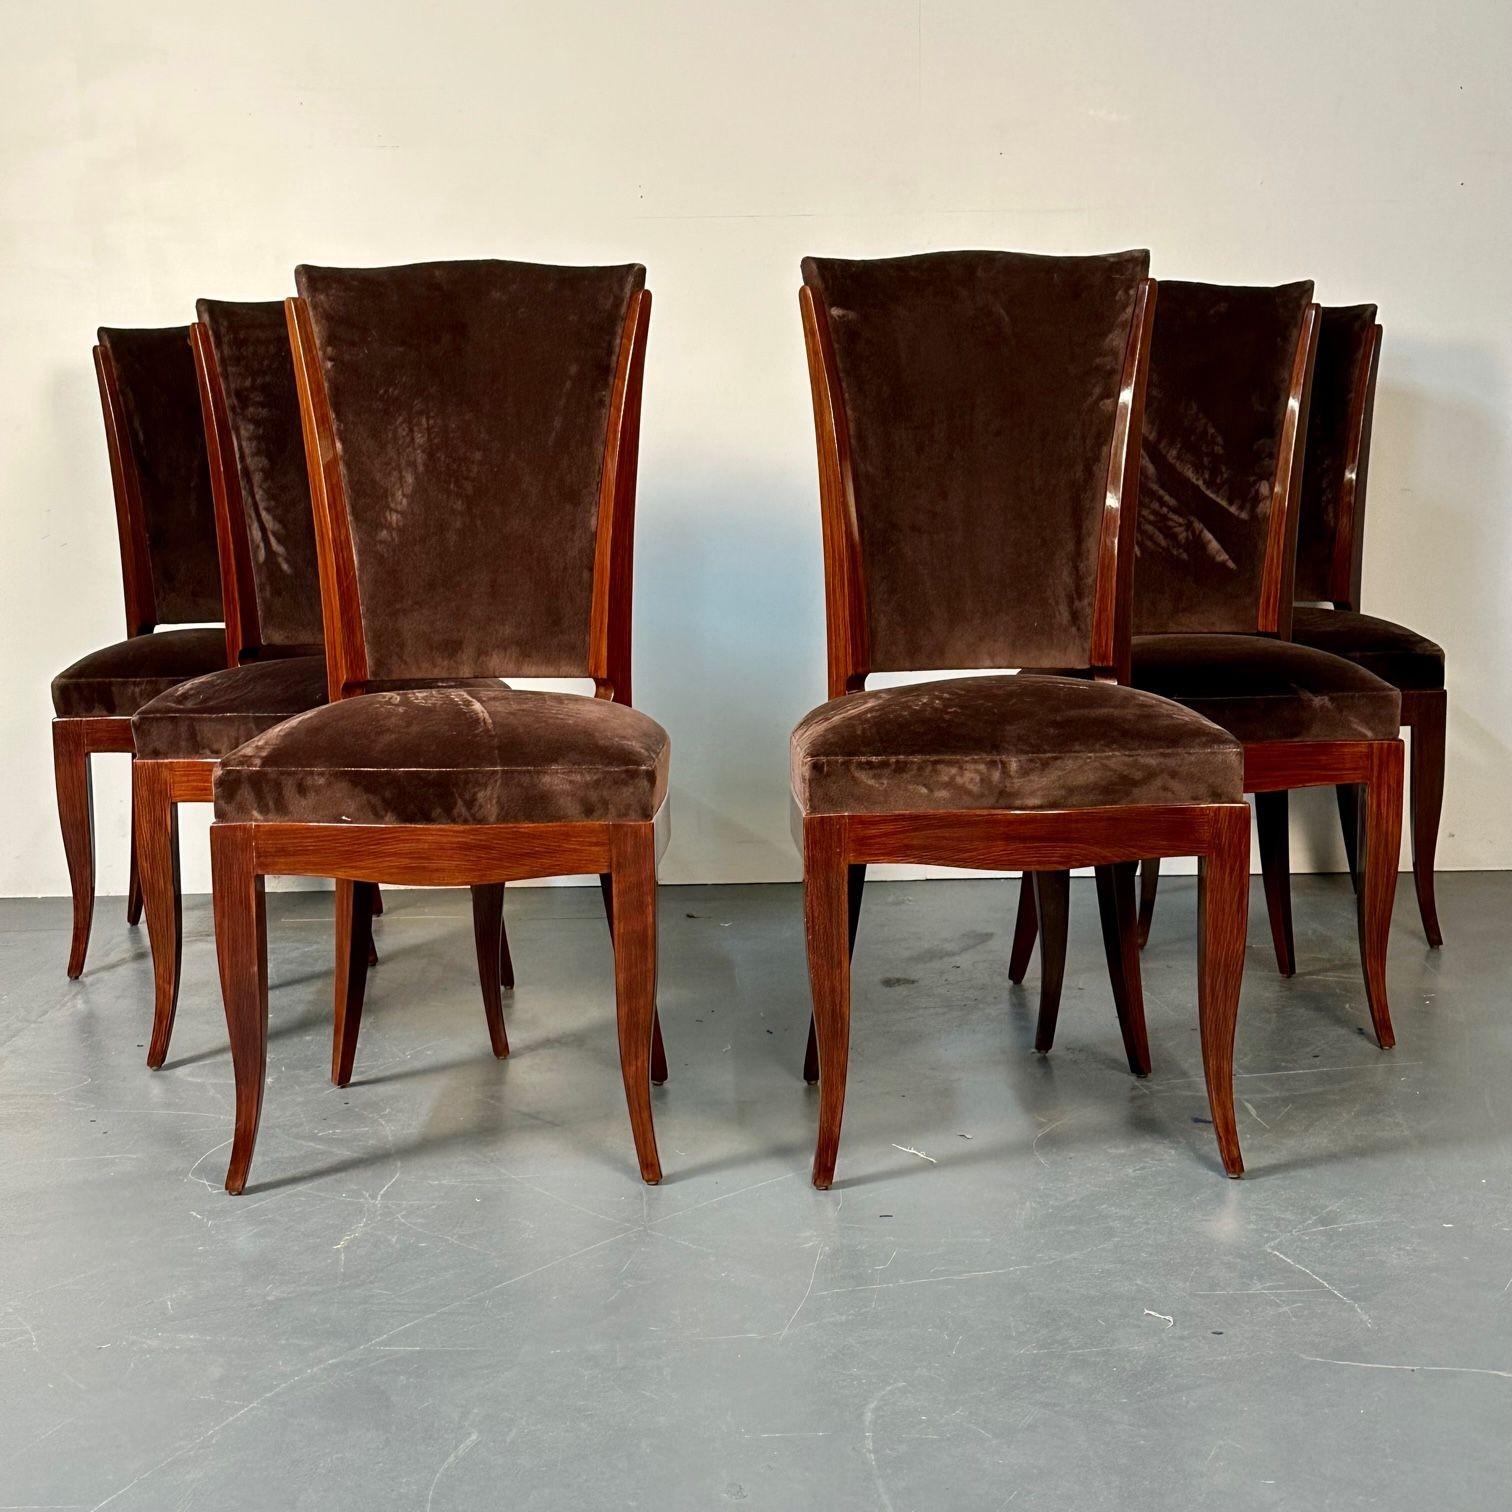 Six French Art Deco Walnut Dining / Side Chairs, Brown Velvet, Ruhlman Style
 
Set of 6 polished walnut and brown velvet dining or side chairs. Emile-Jacques Ruhlman style.
 
Polished Walnut, Fabric
France, 1940s
 
41H x 19W x 21D  / SH 19
 
EXAA